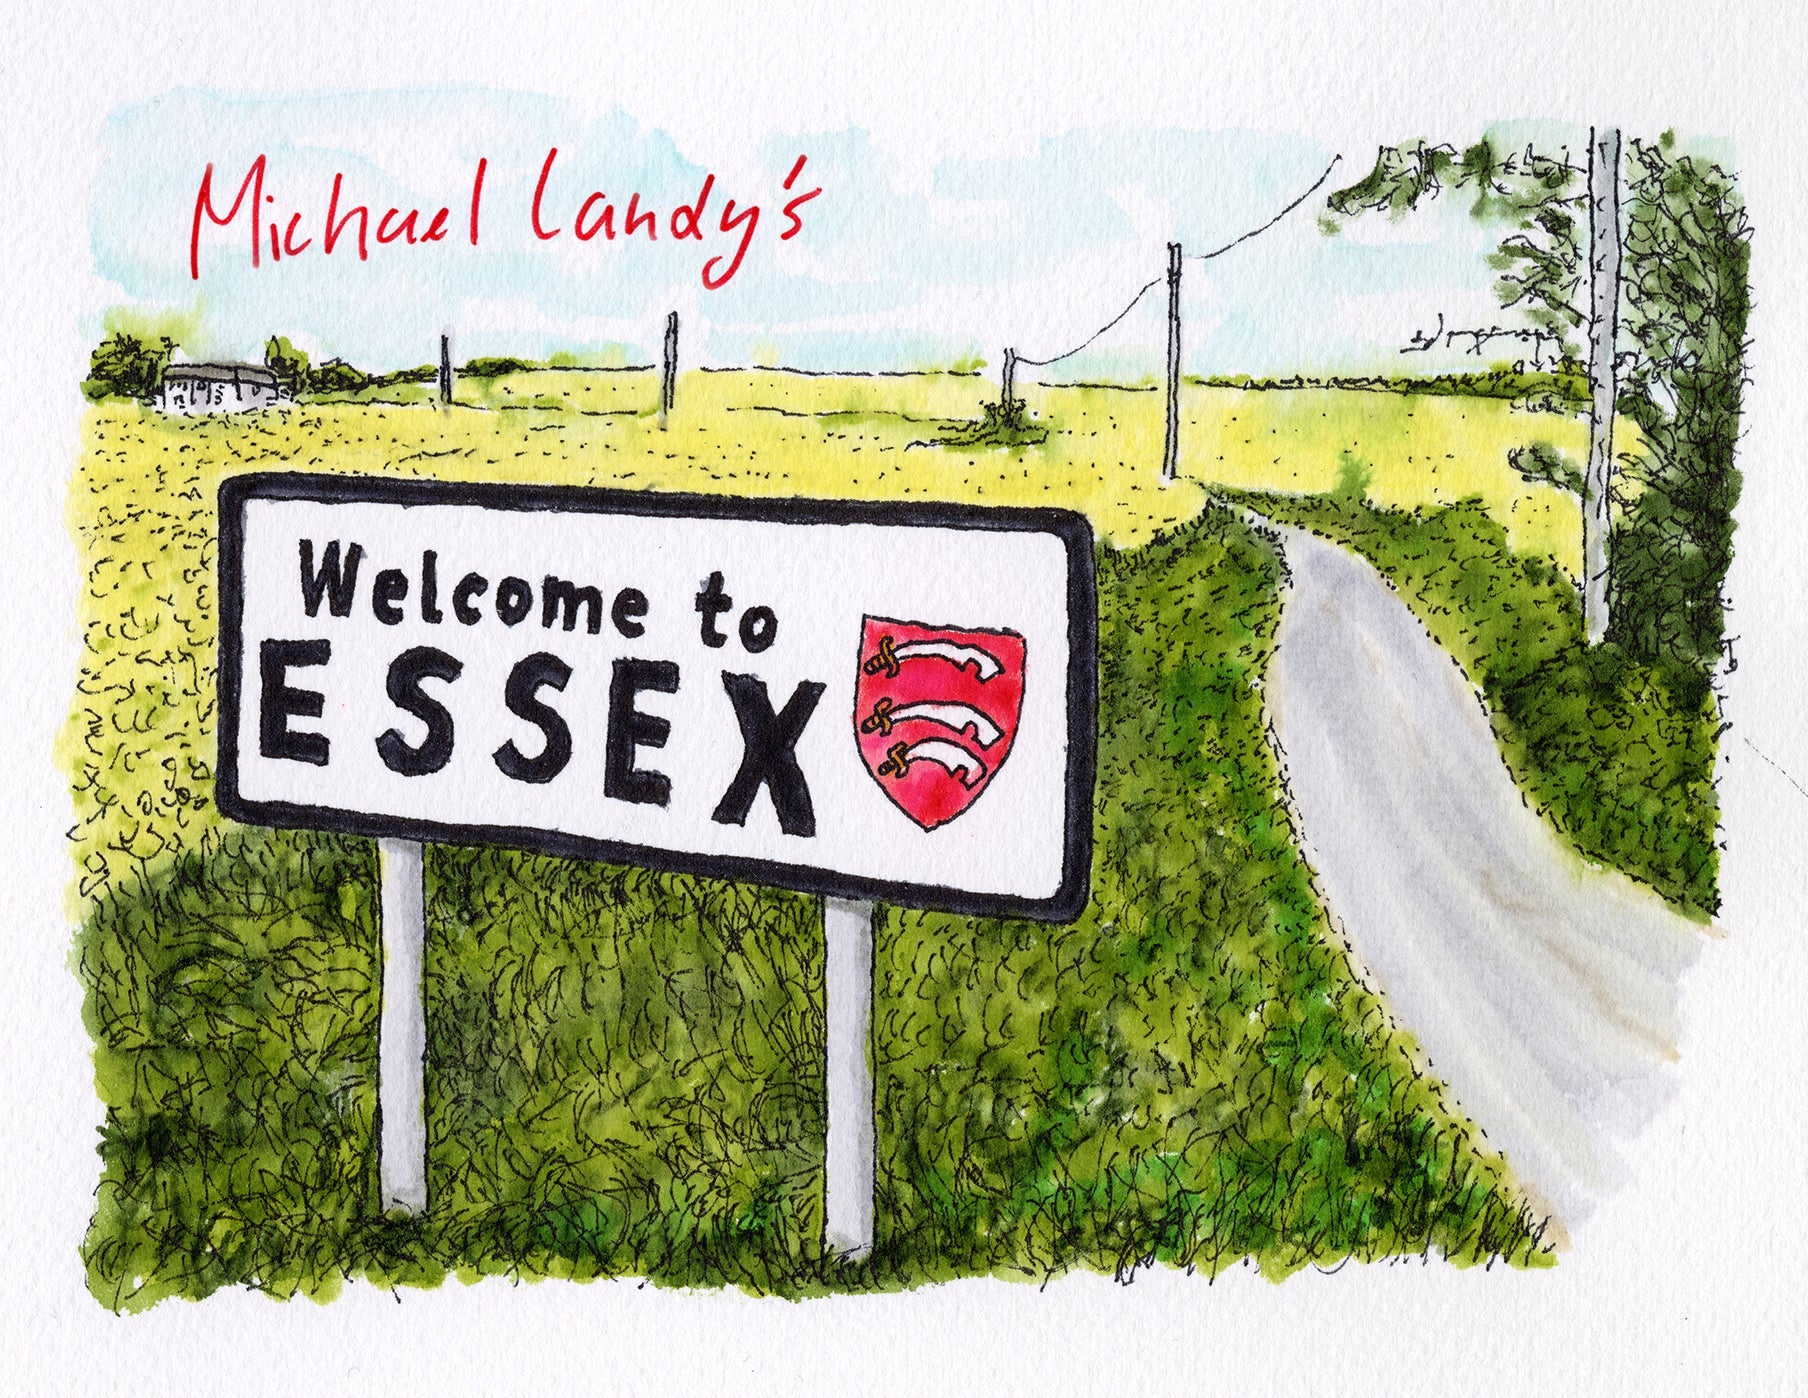 The raw mercantilism of Essex, its refusal to mind its manners, has always been a threat to the metropolitan status quo